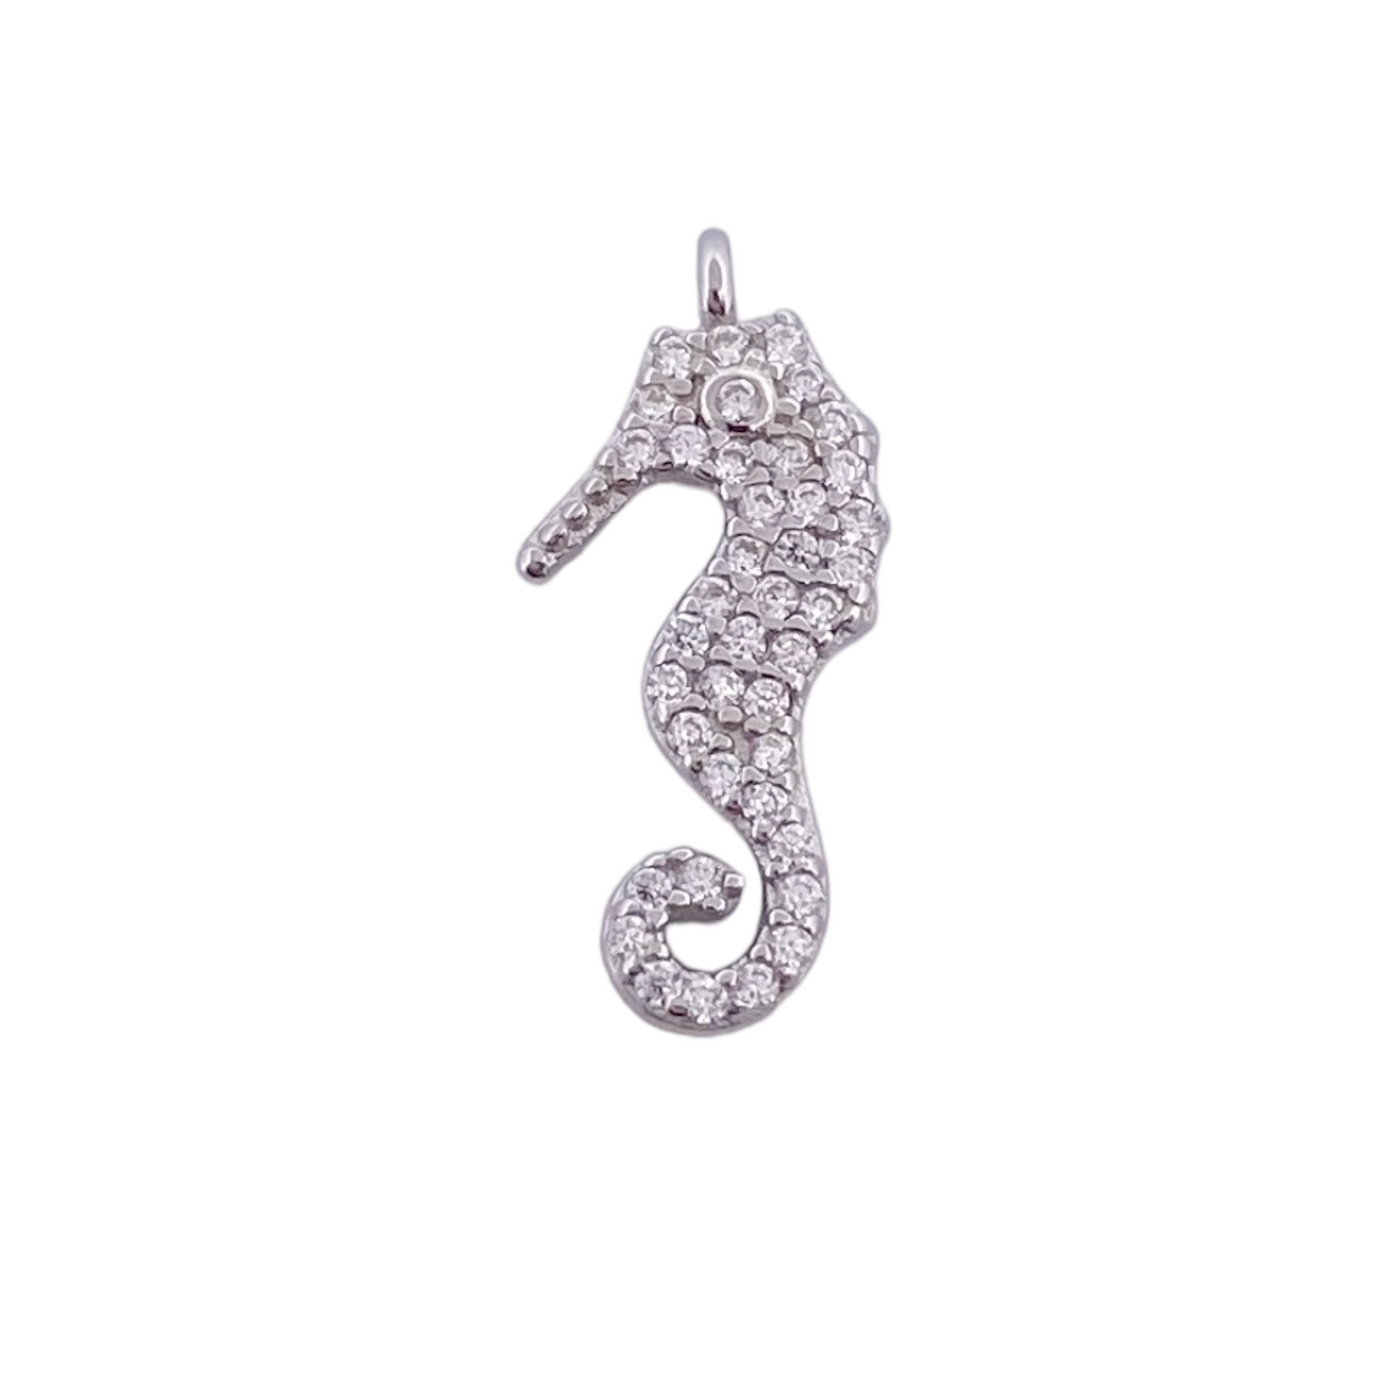 PENDANTS WITH SEAHORSE